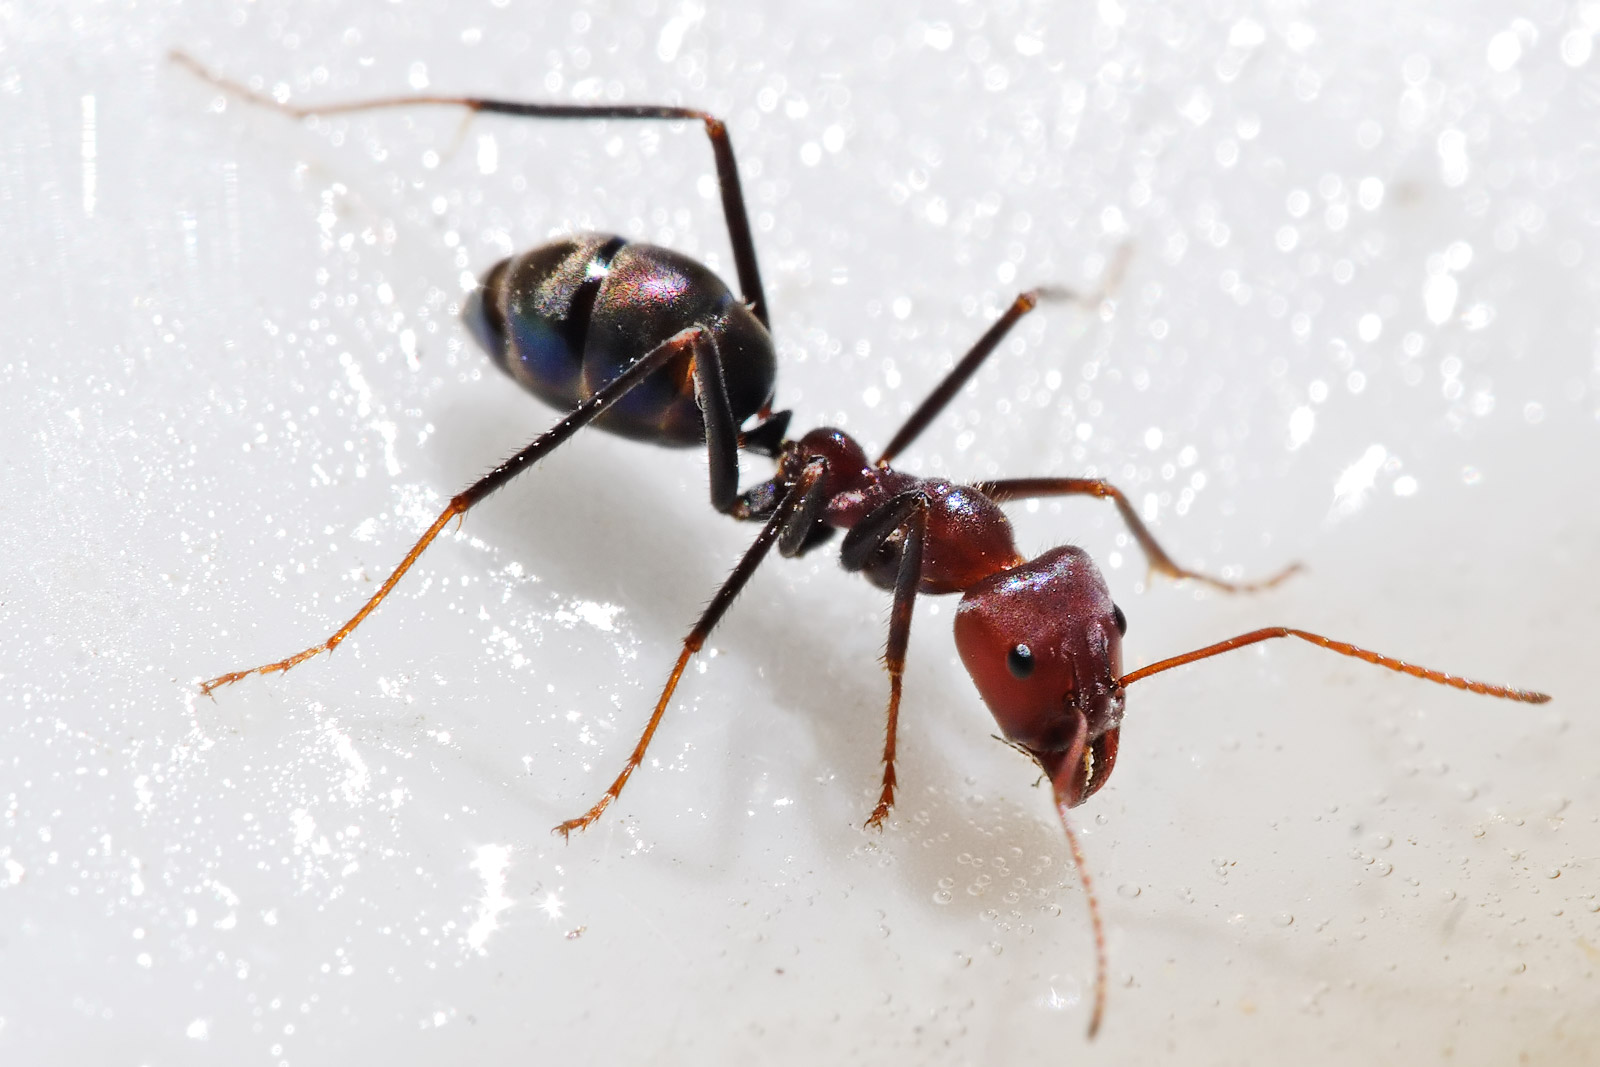 Why are meat ants called meat ants?